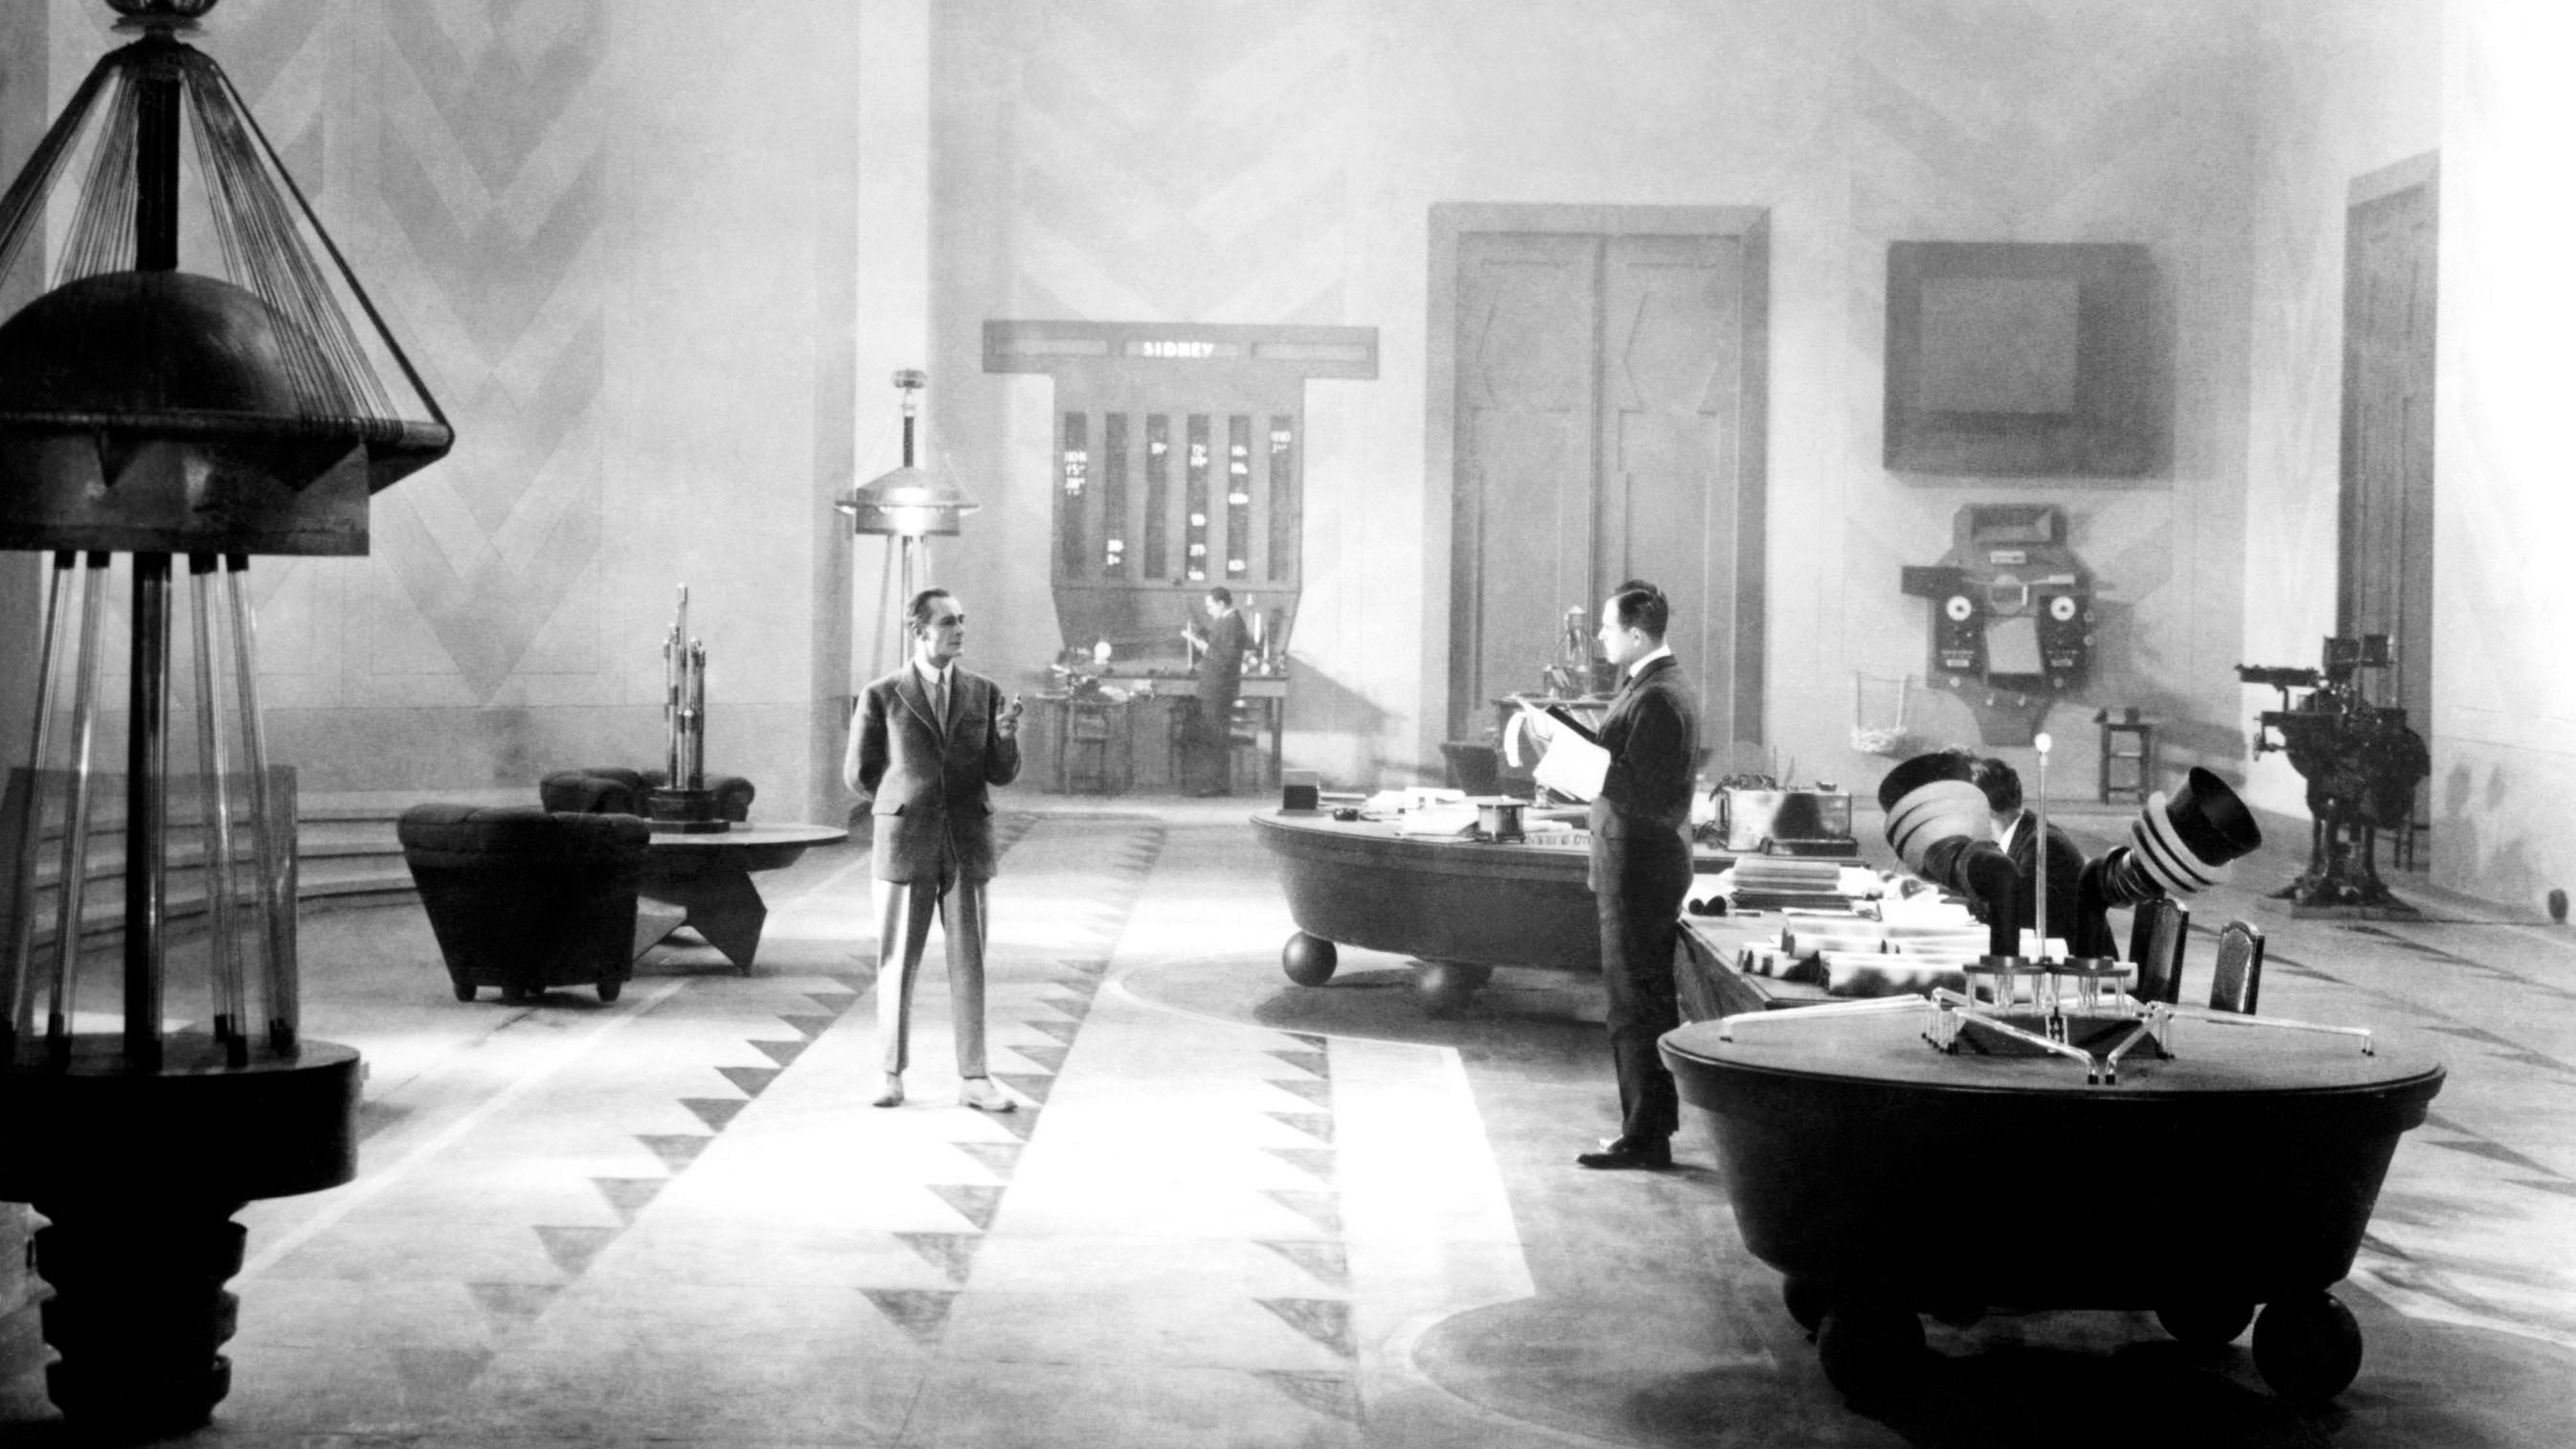 A scene from the film Metropolis with Alfred Abel.